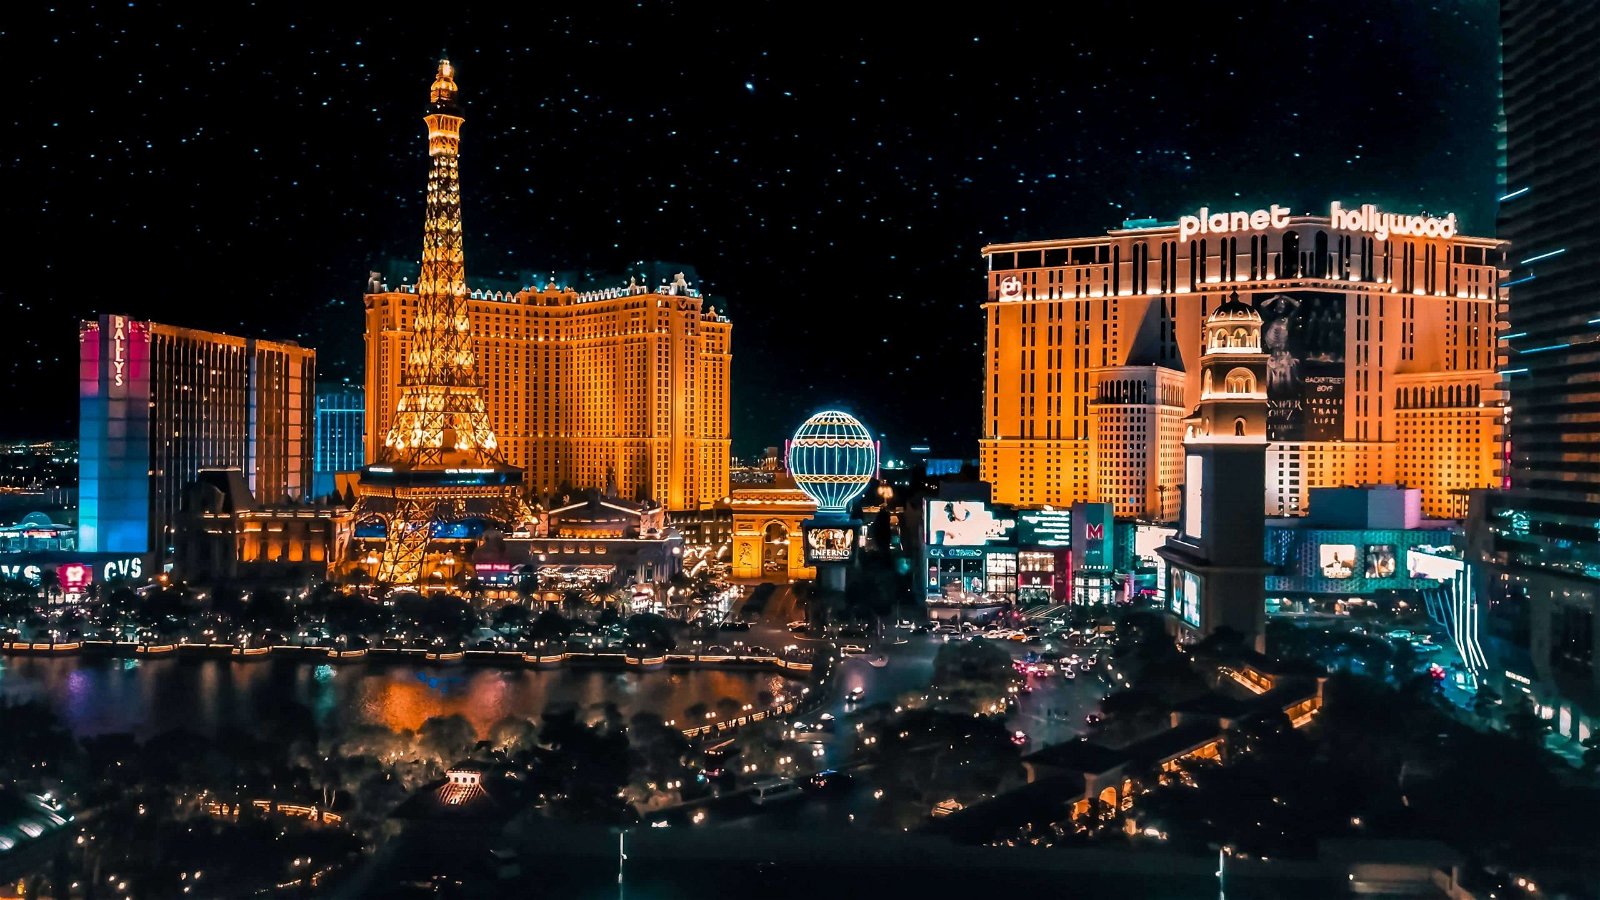 Neon lights, such as those on the Las Vegas strip seen here, are another light source.